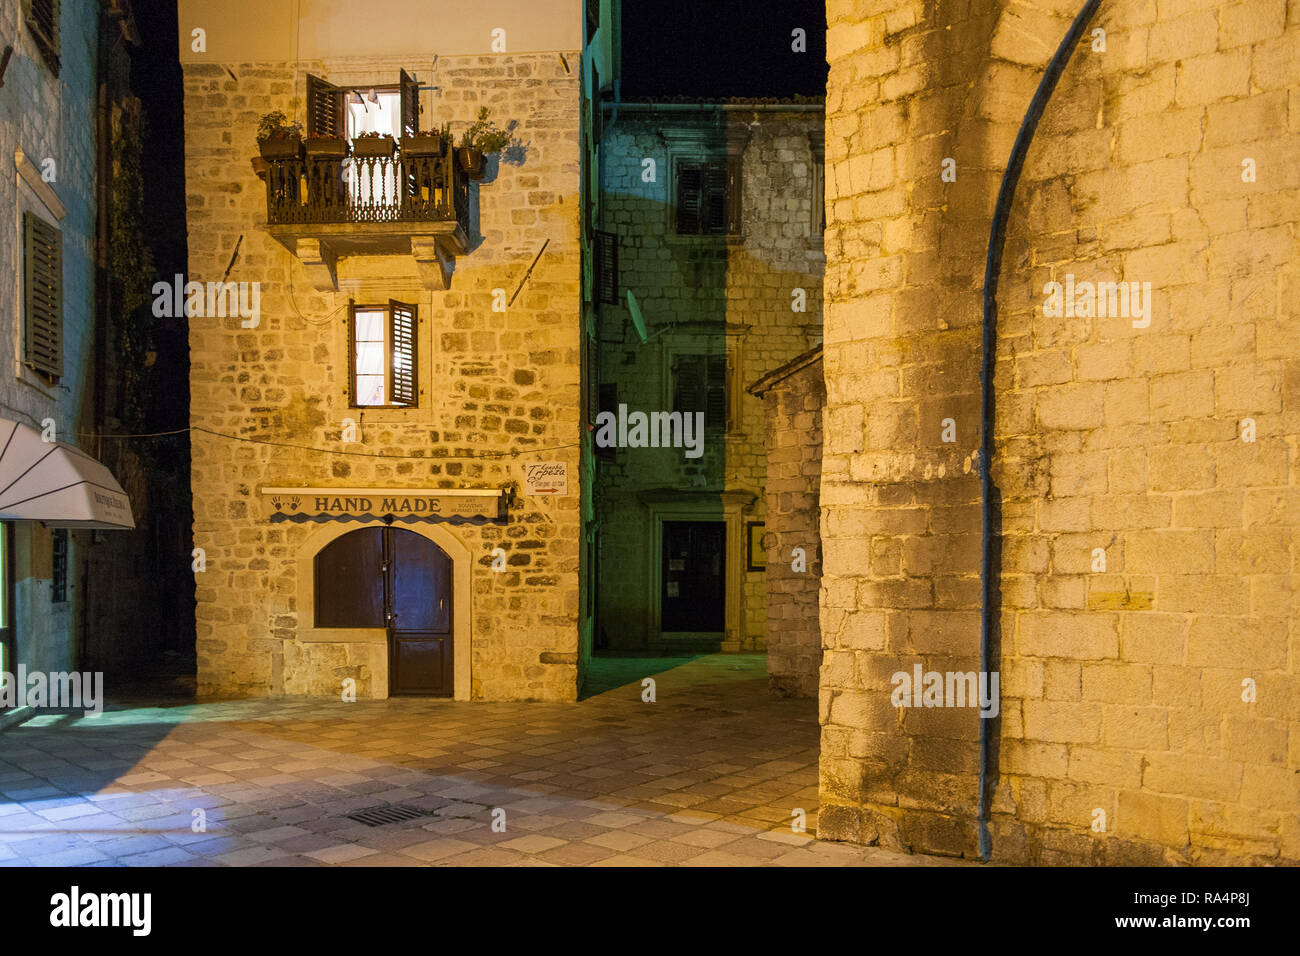 Night time casts shadows on the medieval architecture of the old town of Kotor, Montenegro. Stock Photo